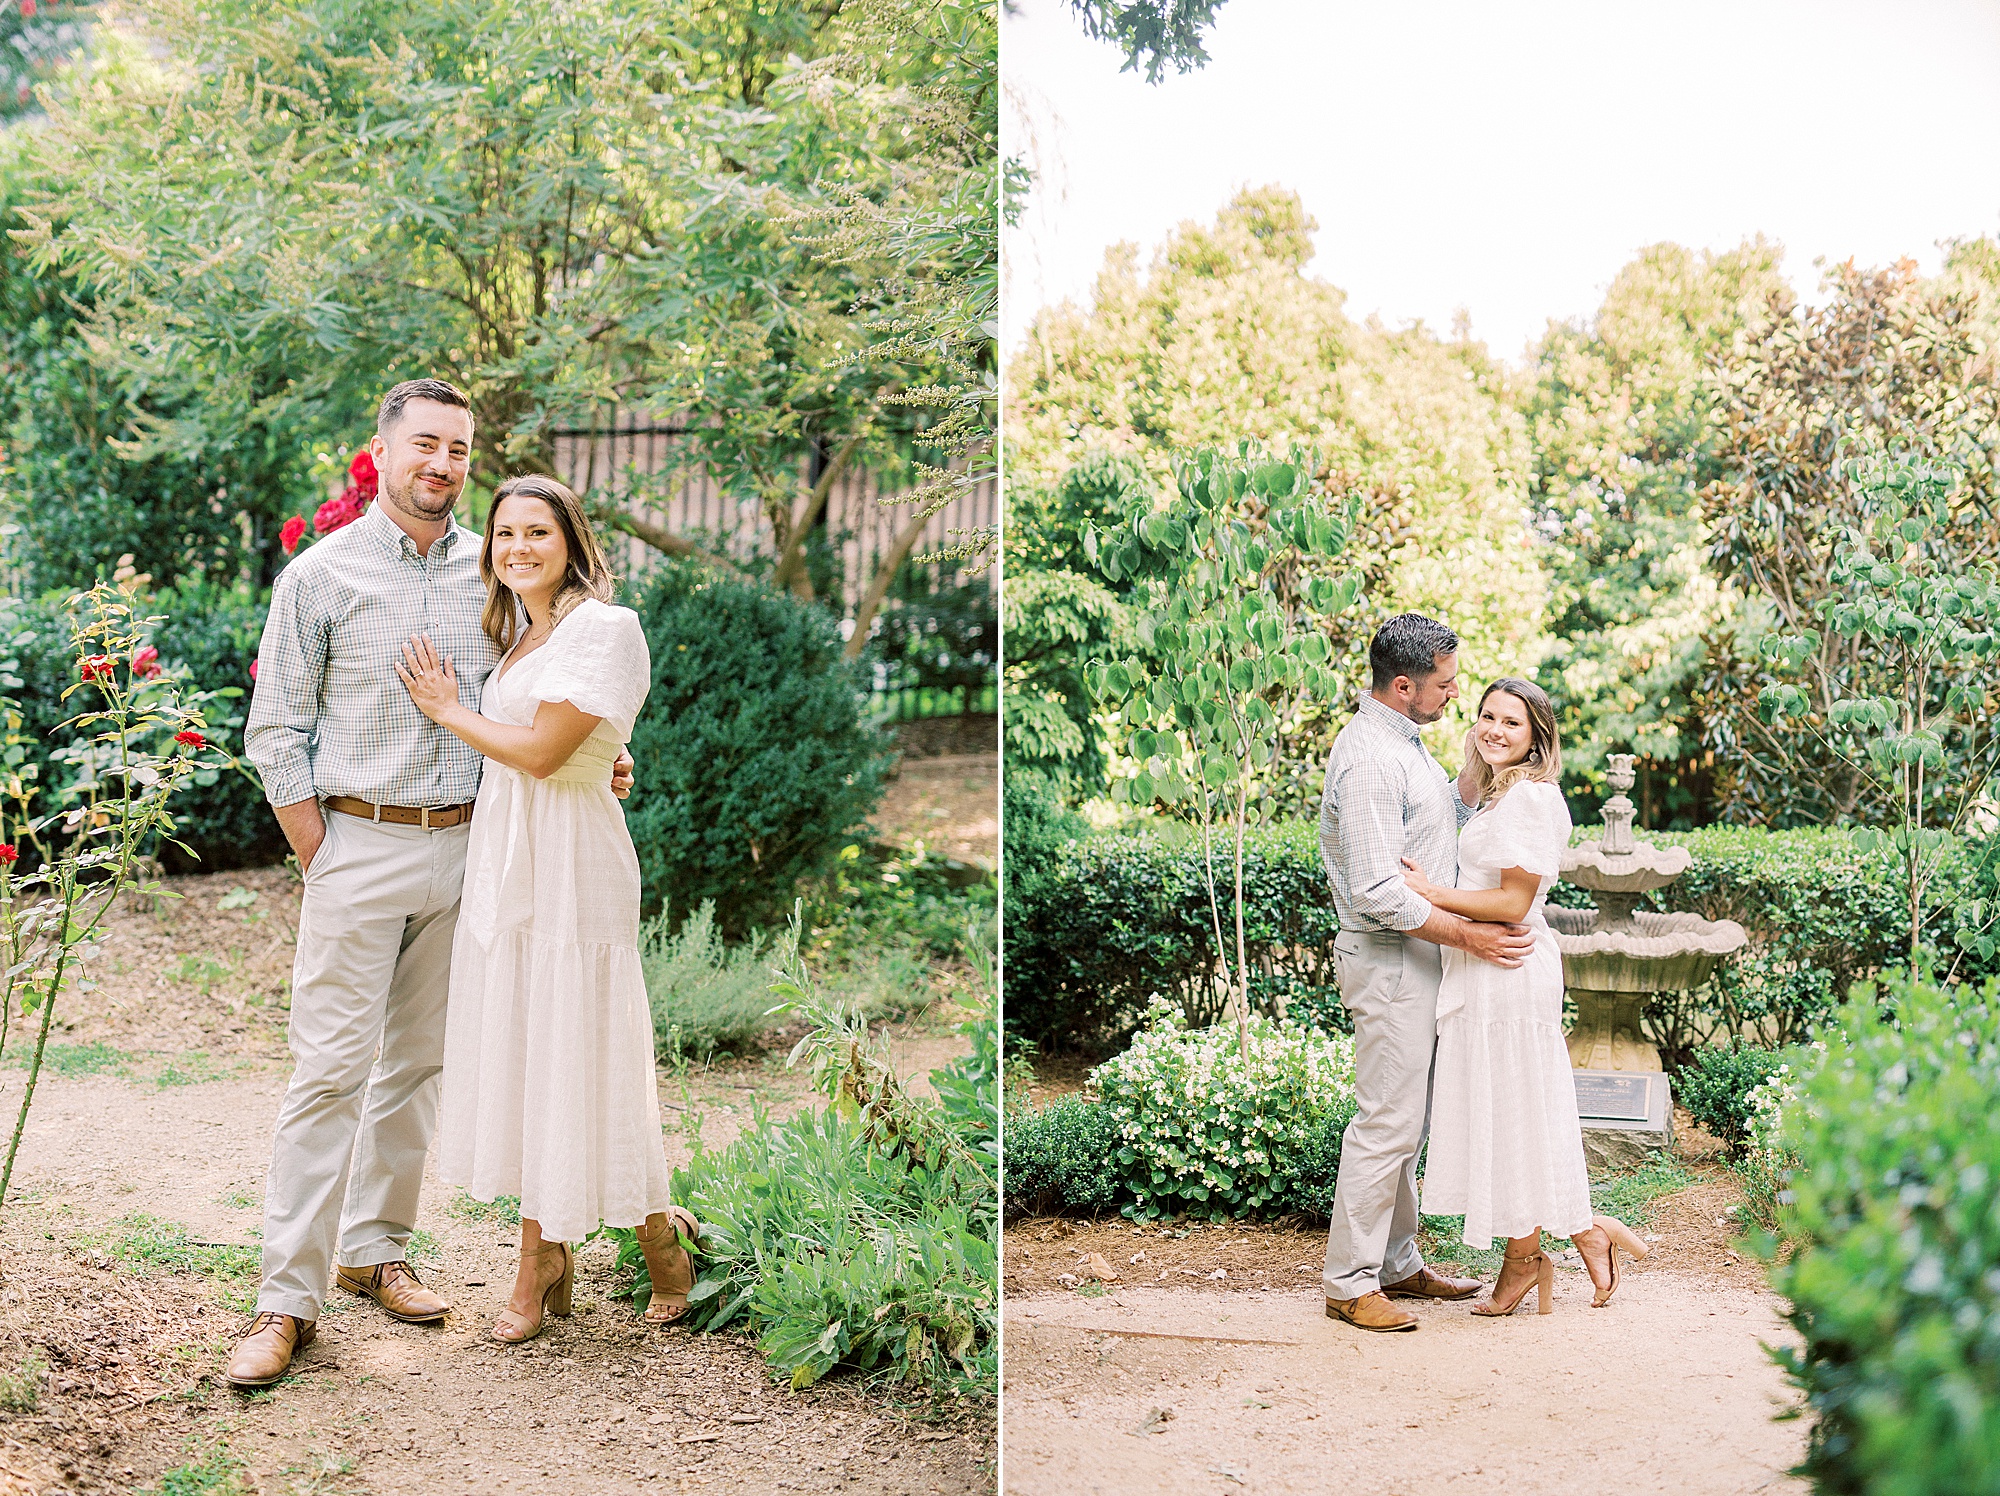 McGill Rose Garden engagement session in the summer